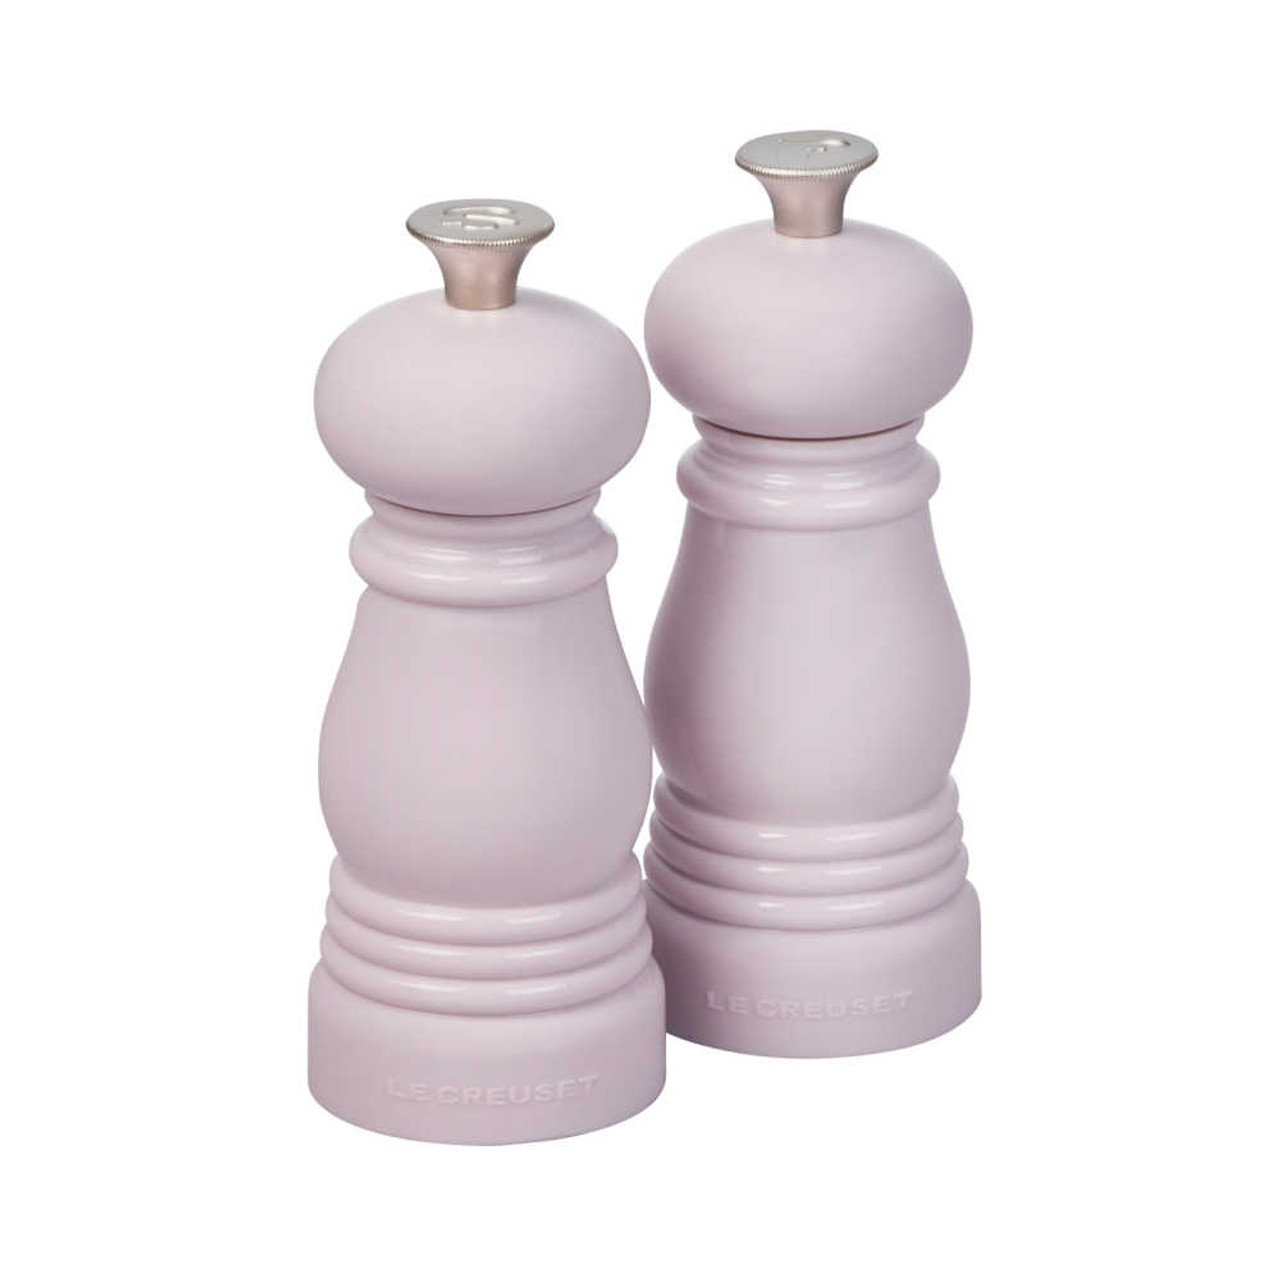 https://cdn11.bigcommerce.com/s-hccytny0od/images/stencil/1280x1280/products/5315/23054/Le_Creuset_Petite_Salt_and_Pepper_Mill_Set_Shallot__99879.1679433971.jpg?c=2?imbypass=on